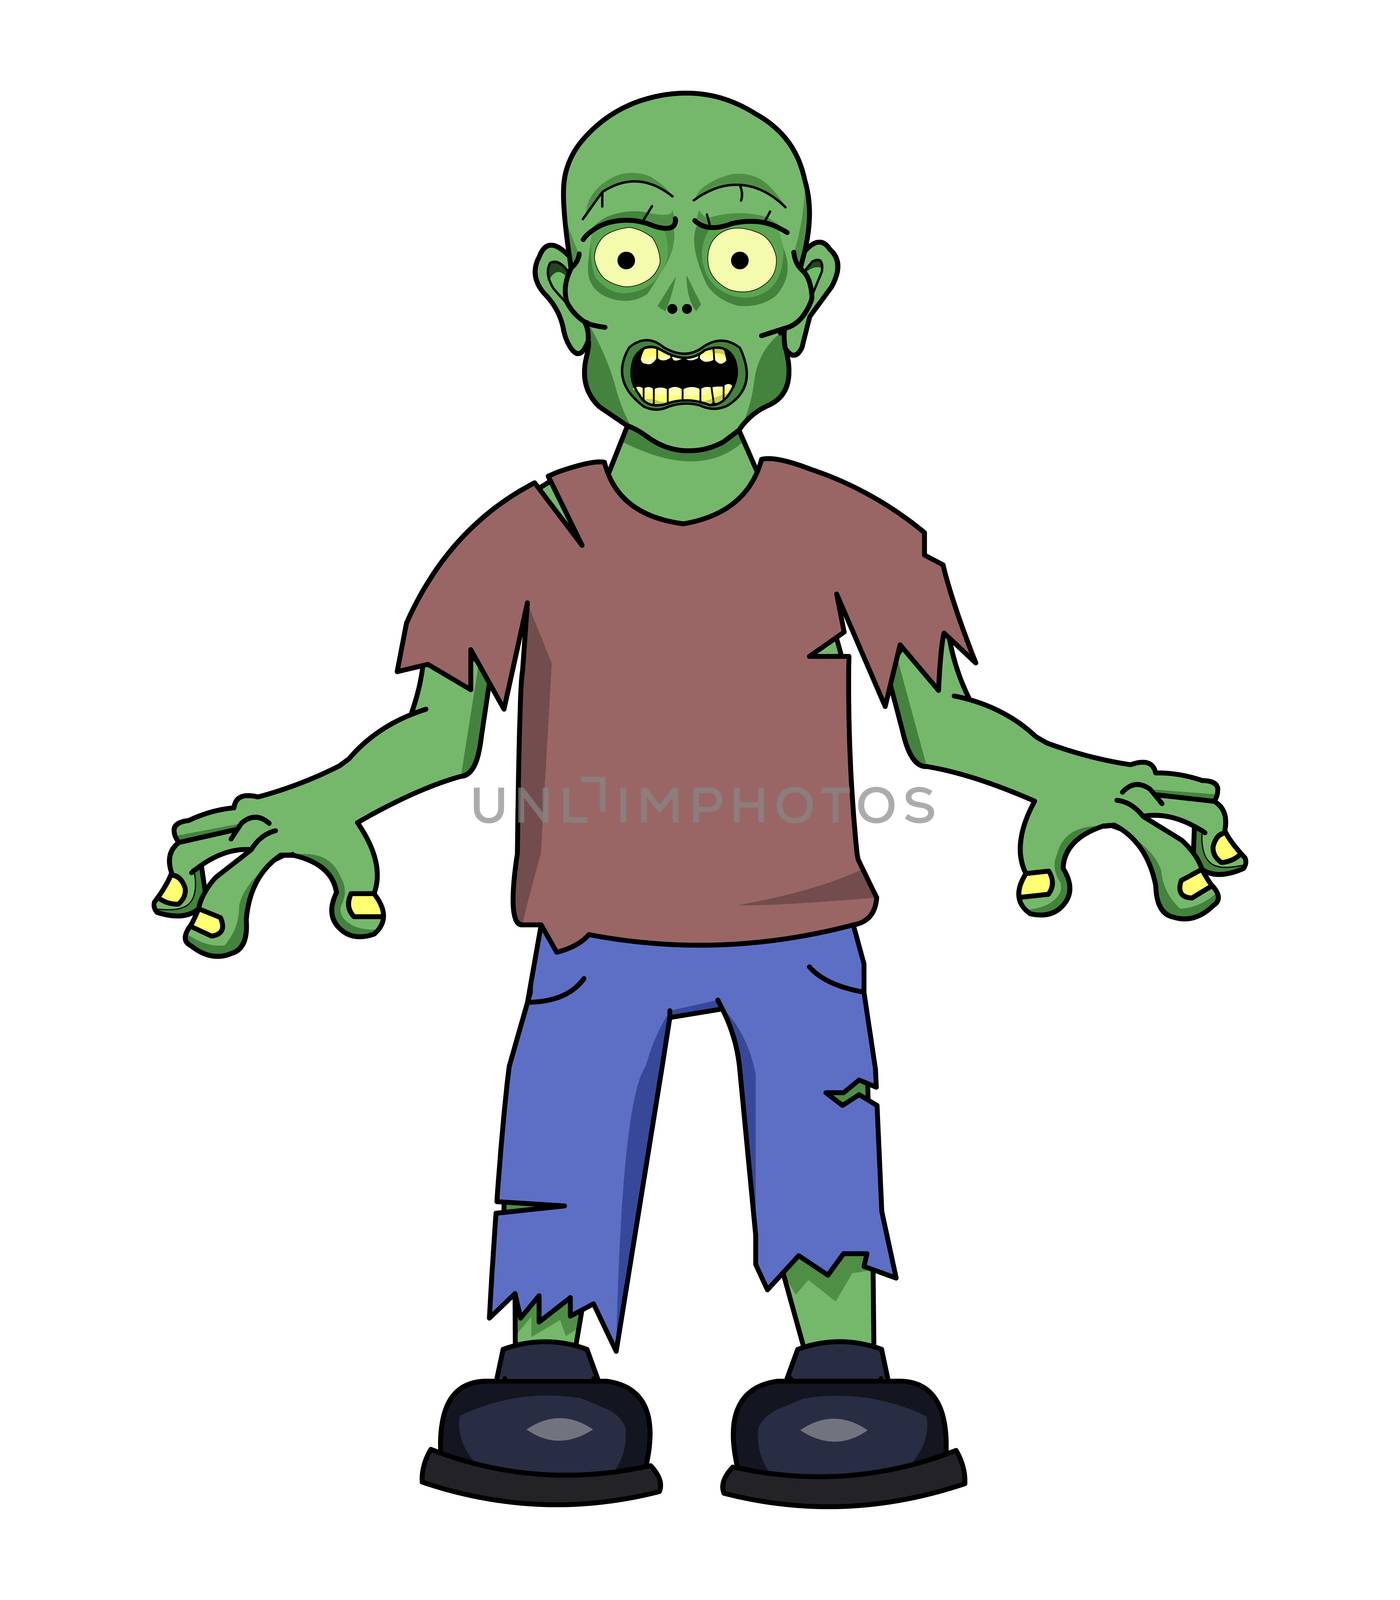 A typical cartoon zombie.